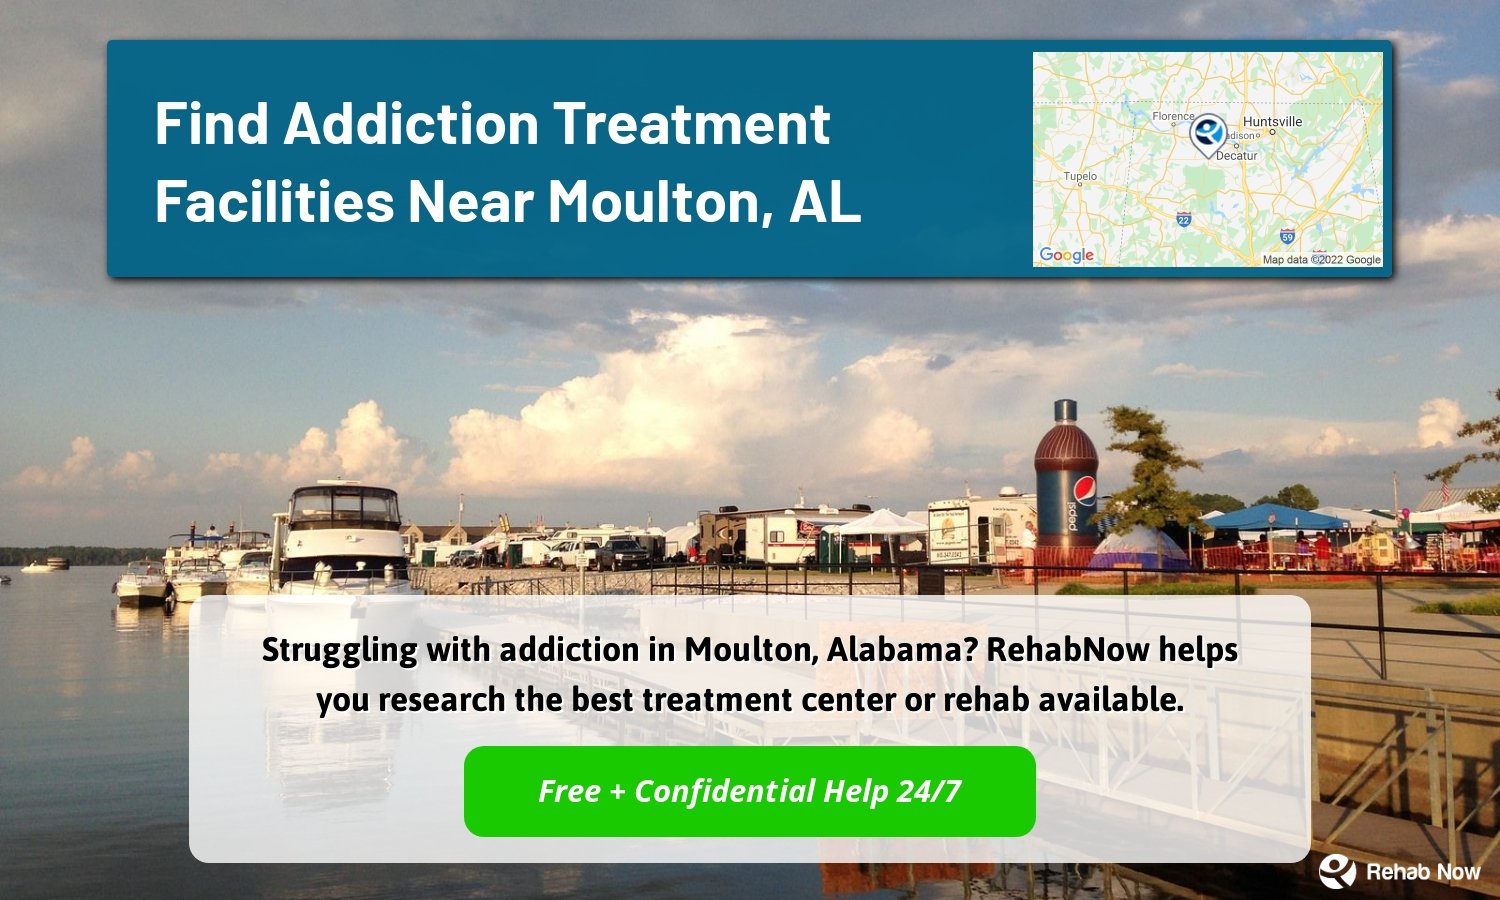 Struggling with addiction in Moulton, Alabama? RehabNow helps you research the best treatment center or rehab available.